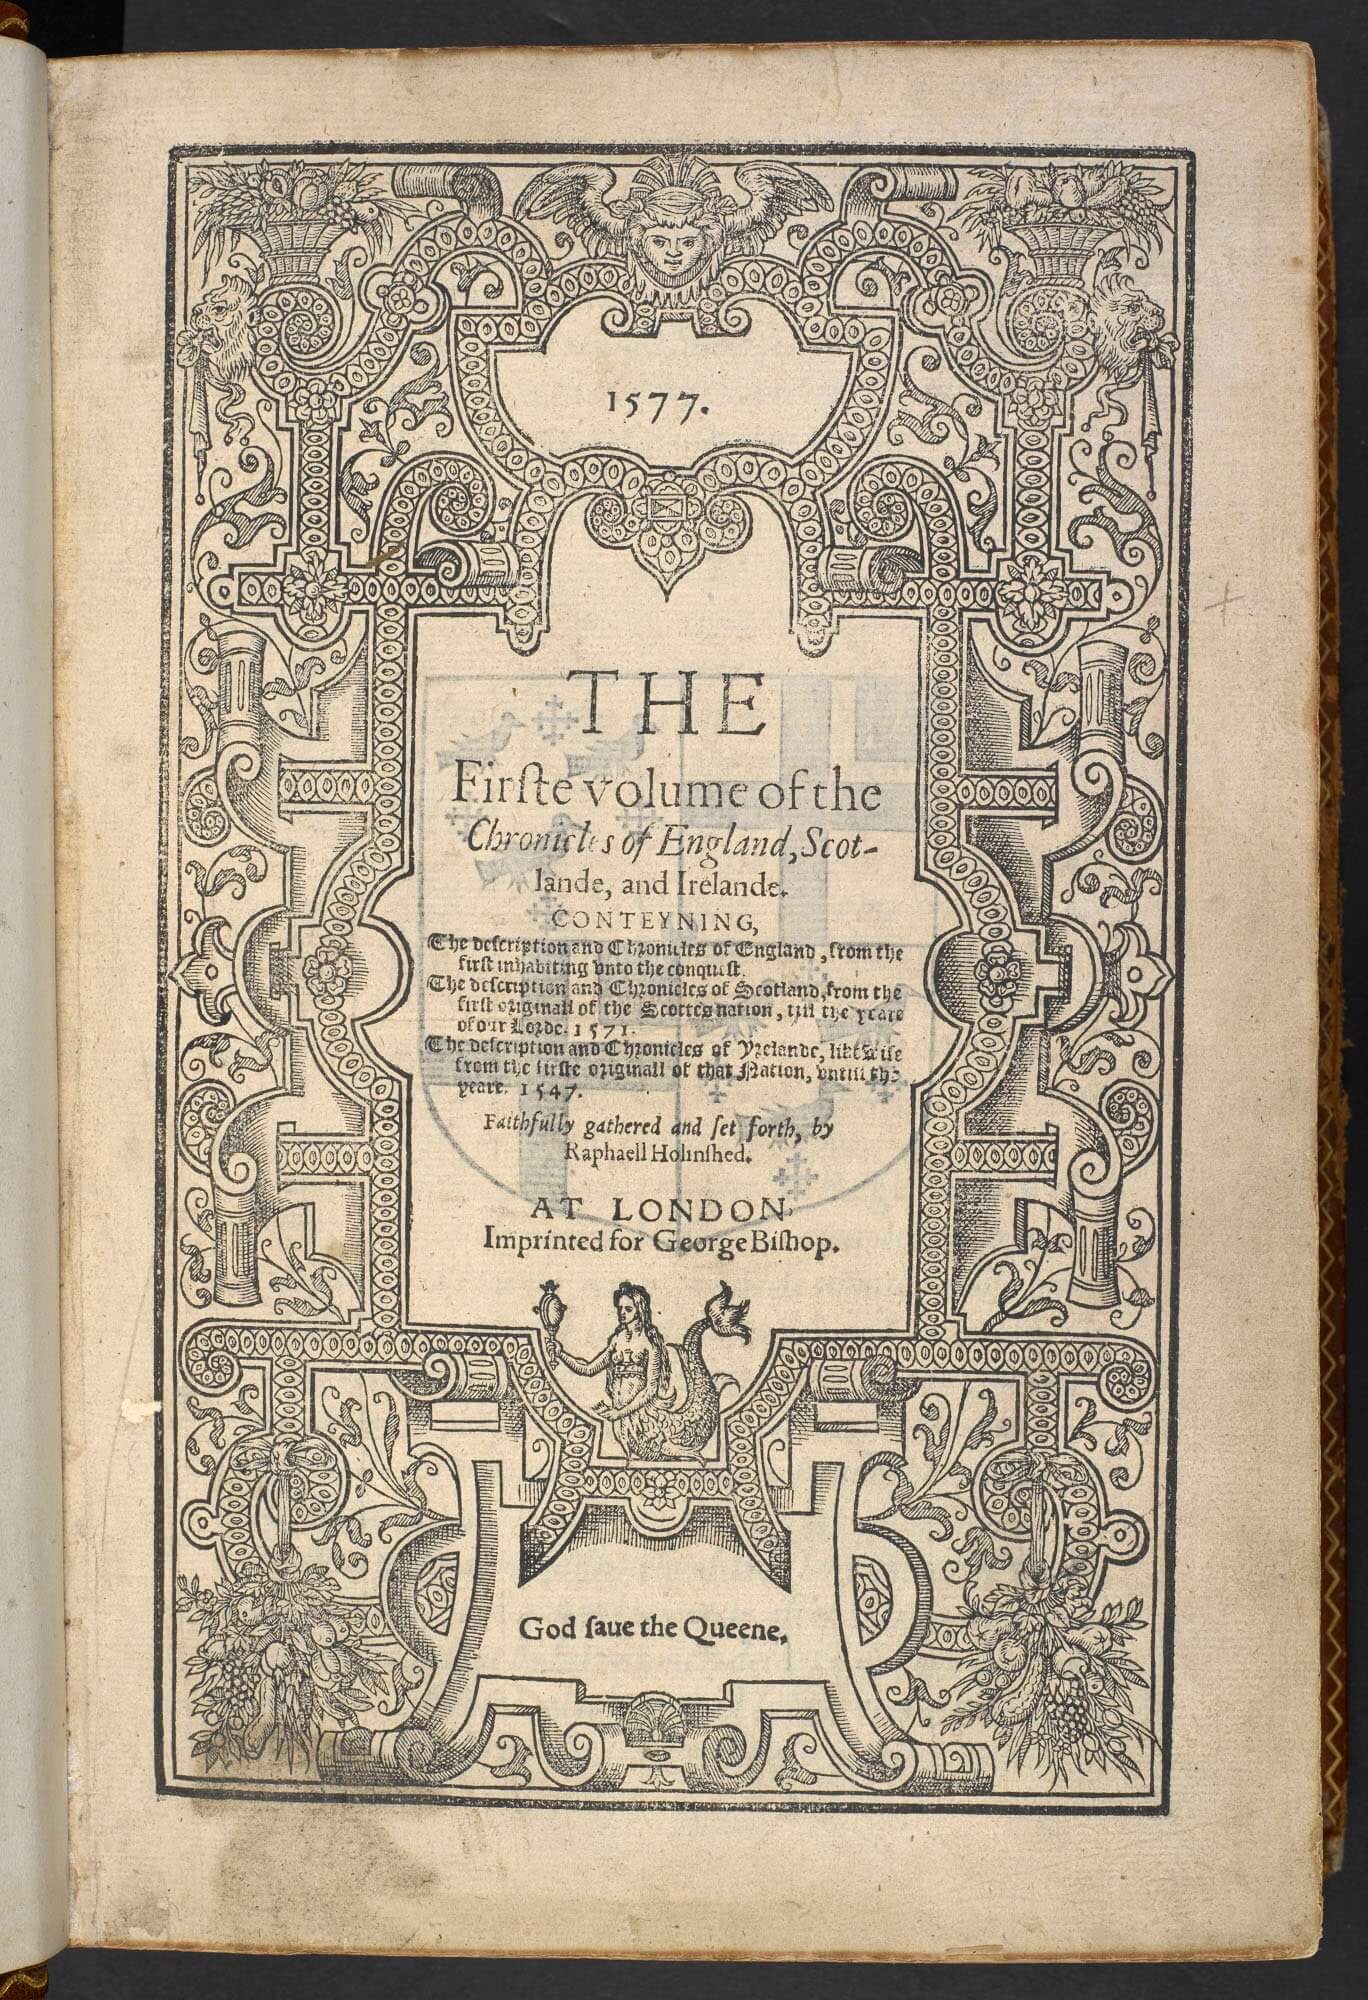 In some cases, when a group of publishers together paid for a work to be printed, the work would be printed with different states of the title page, each publisher being named separately. Here, although a group of men collaborated to pay for the publication of Holinshed's Chronicles, this state of the title page lists only Lucas Harrison as the publisher (compare to this copy of the work).